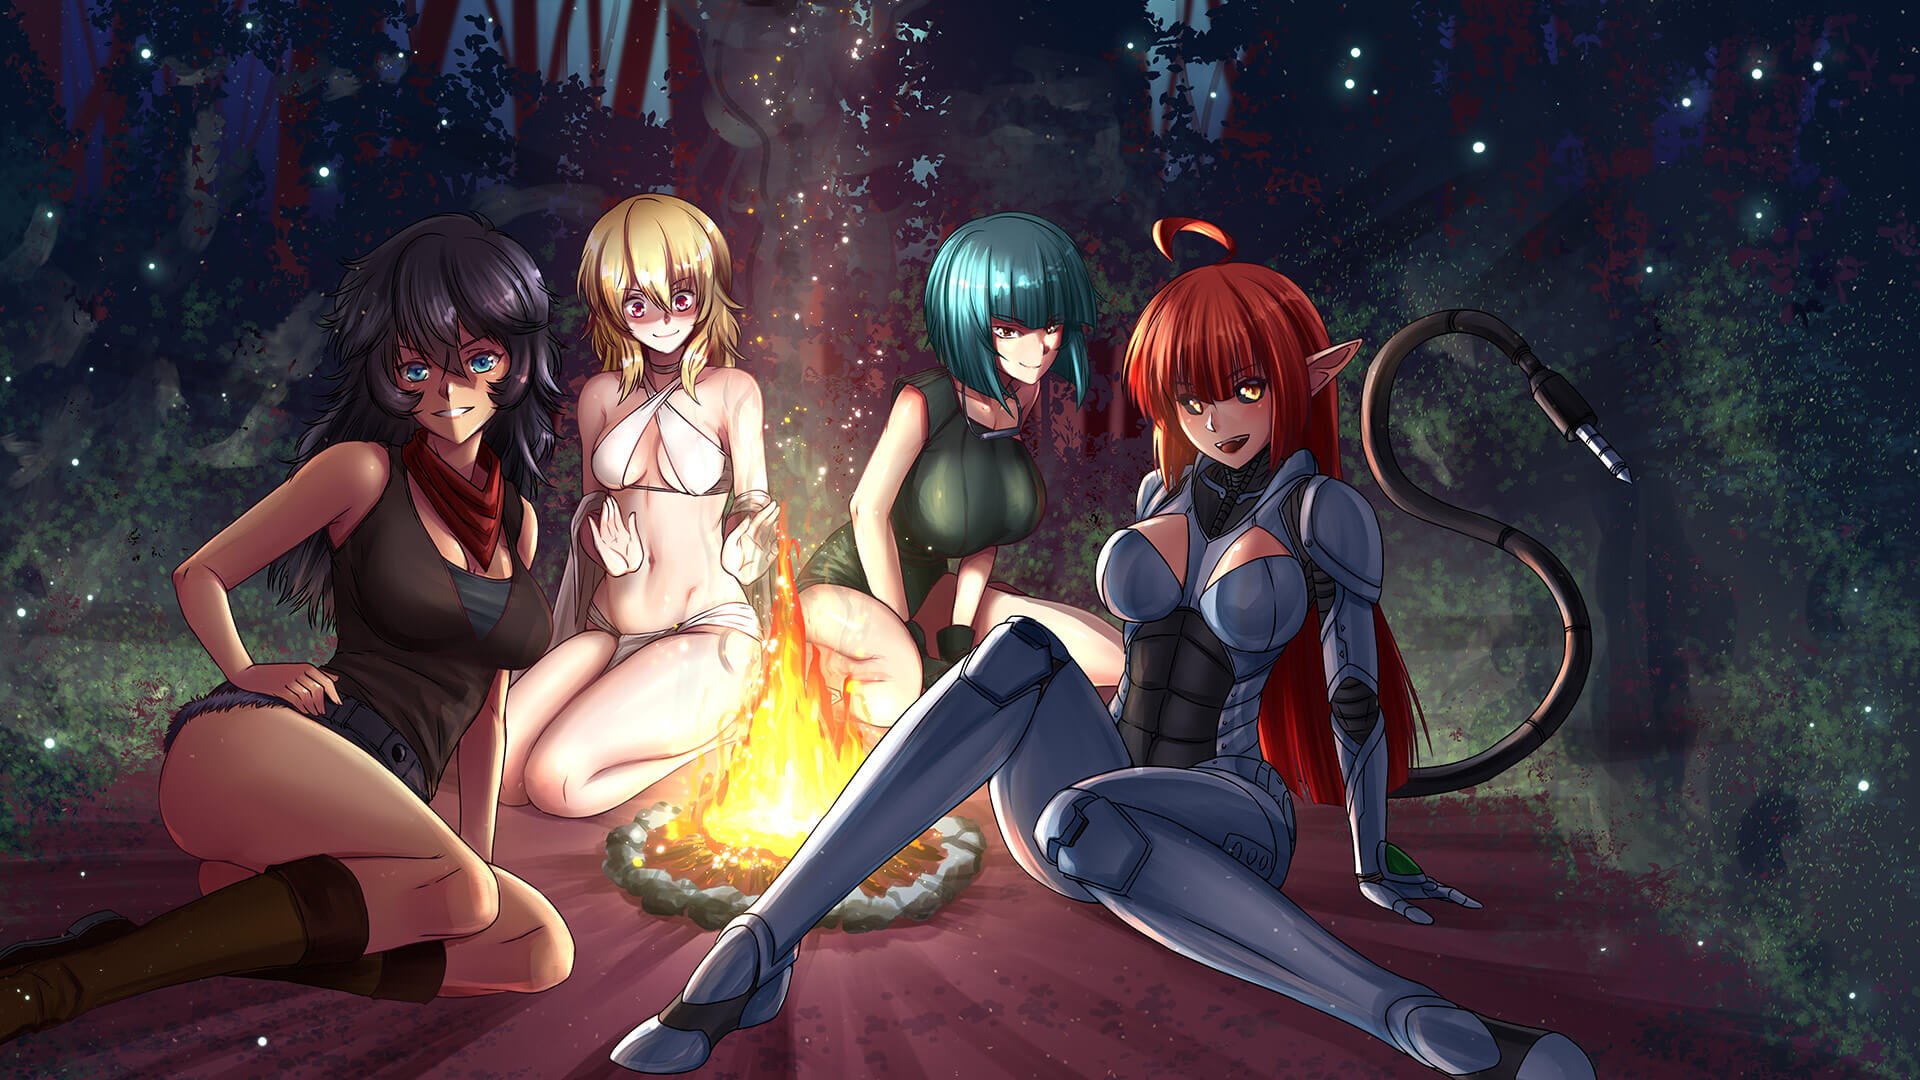 Group Lesbian Sex 69 - Shelter 69 - Strategy Sex Game with APK file | Nutaku